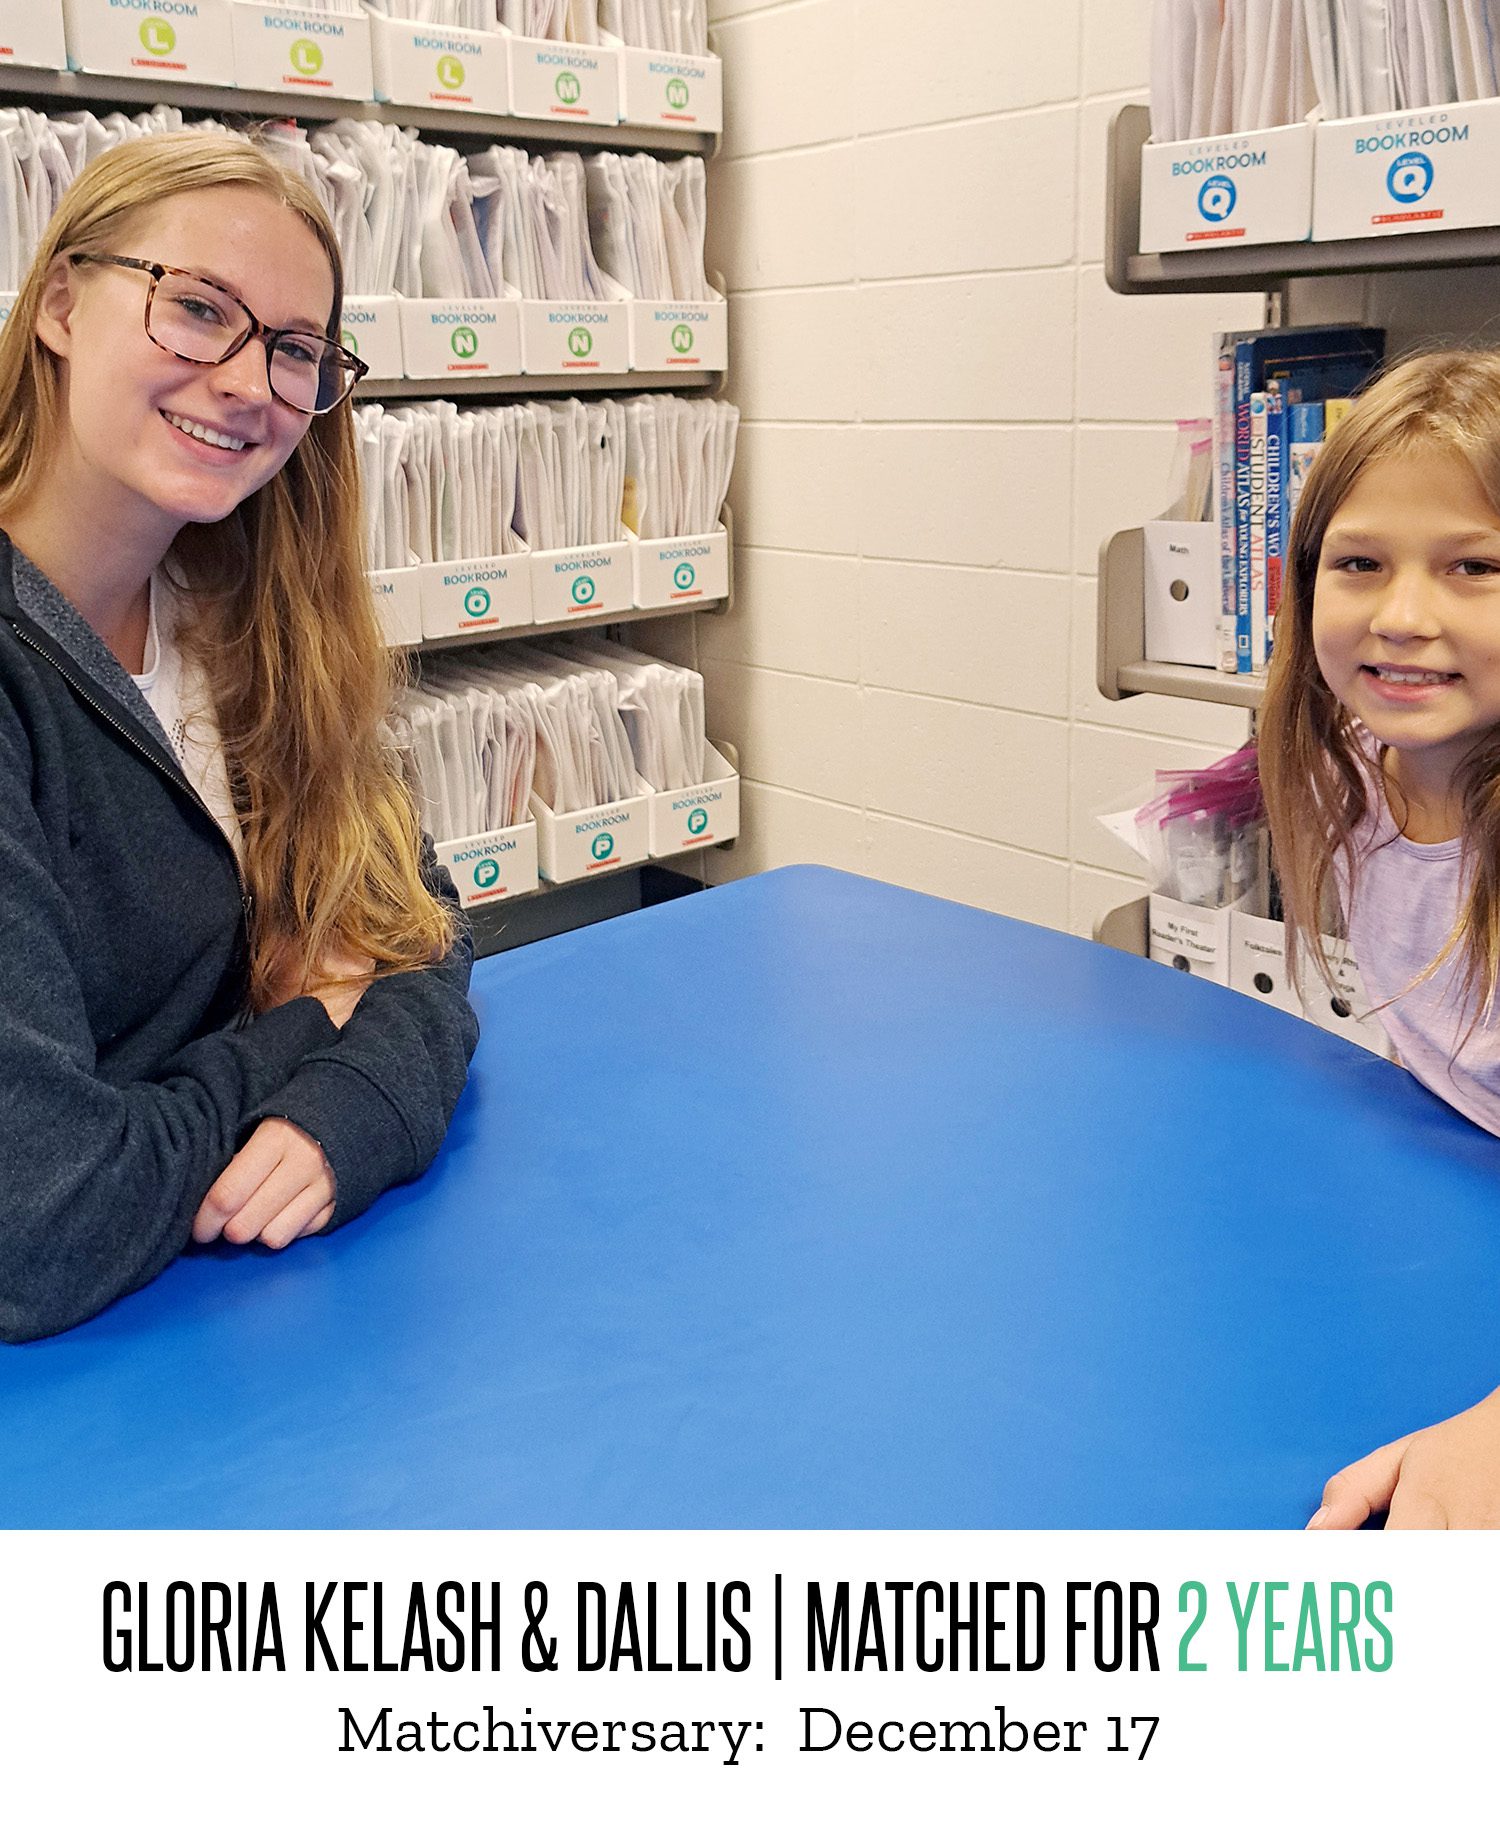 Gloria Kelash and Dallis pose for a picture after being matched for two years